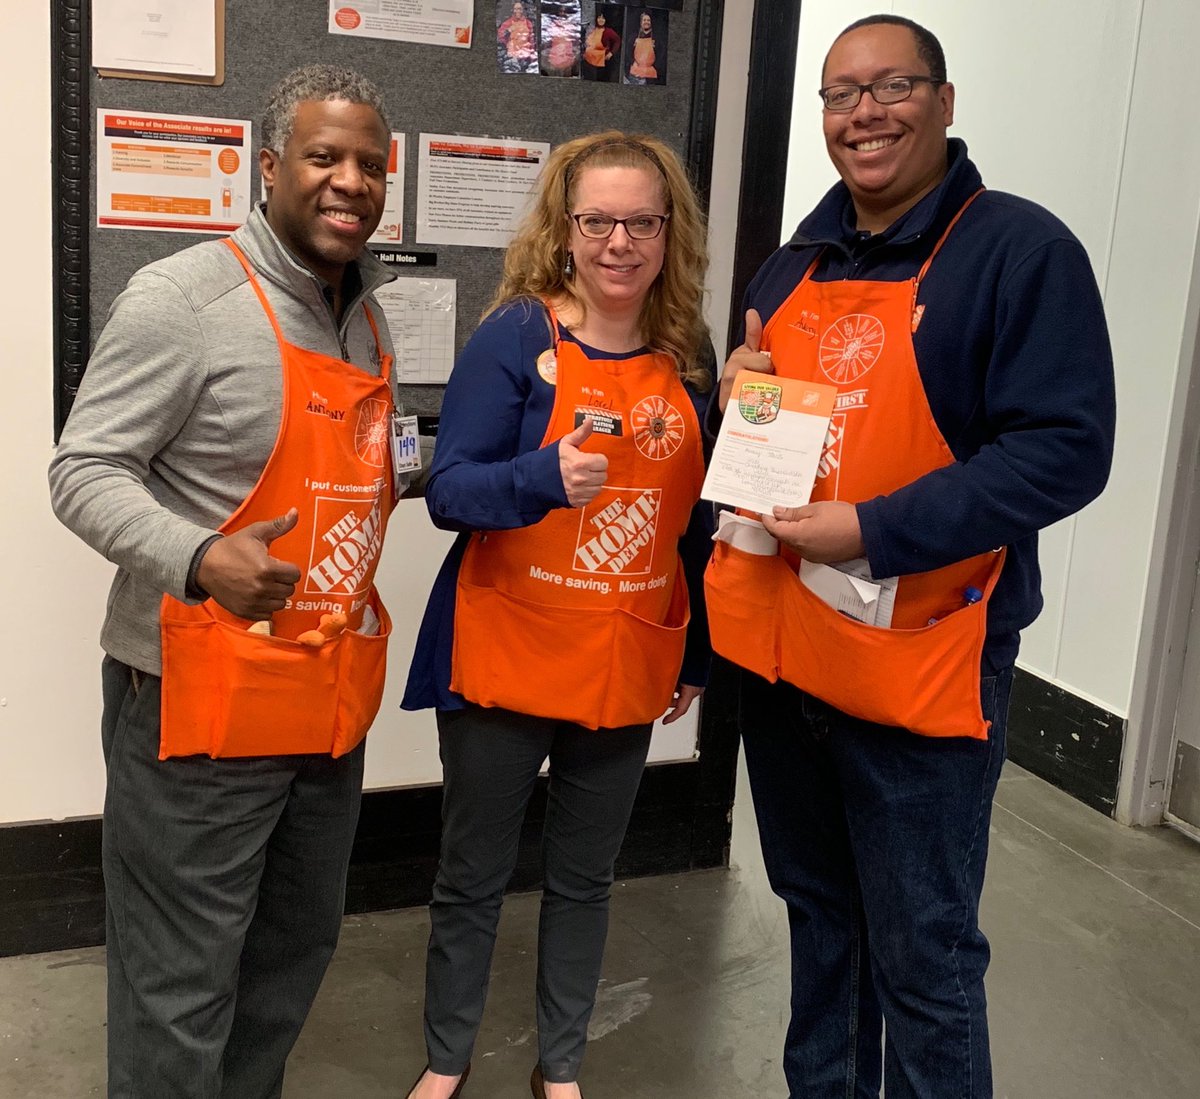 Congratulations on the improvements in D31 Avery! Keep up the good work! #holeinone #driveforgreen ⁦@McFarrenGary⁩ ⁦@THDDetroit⁩